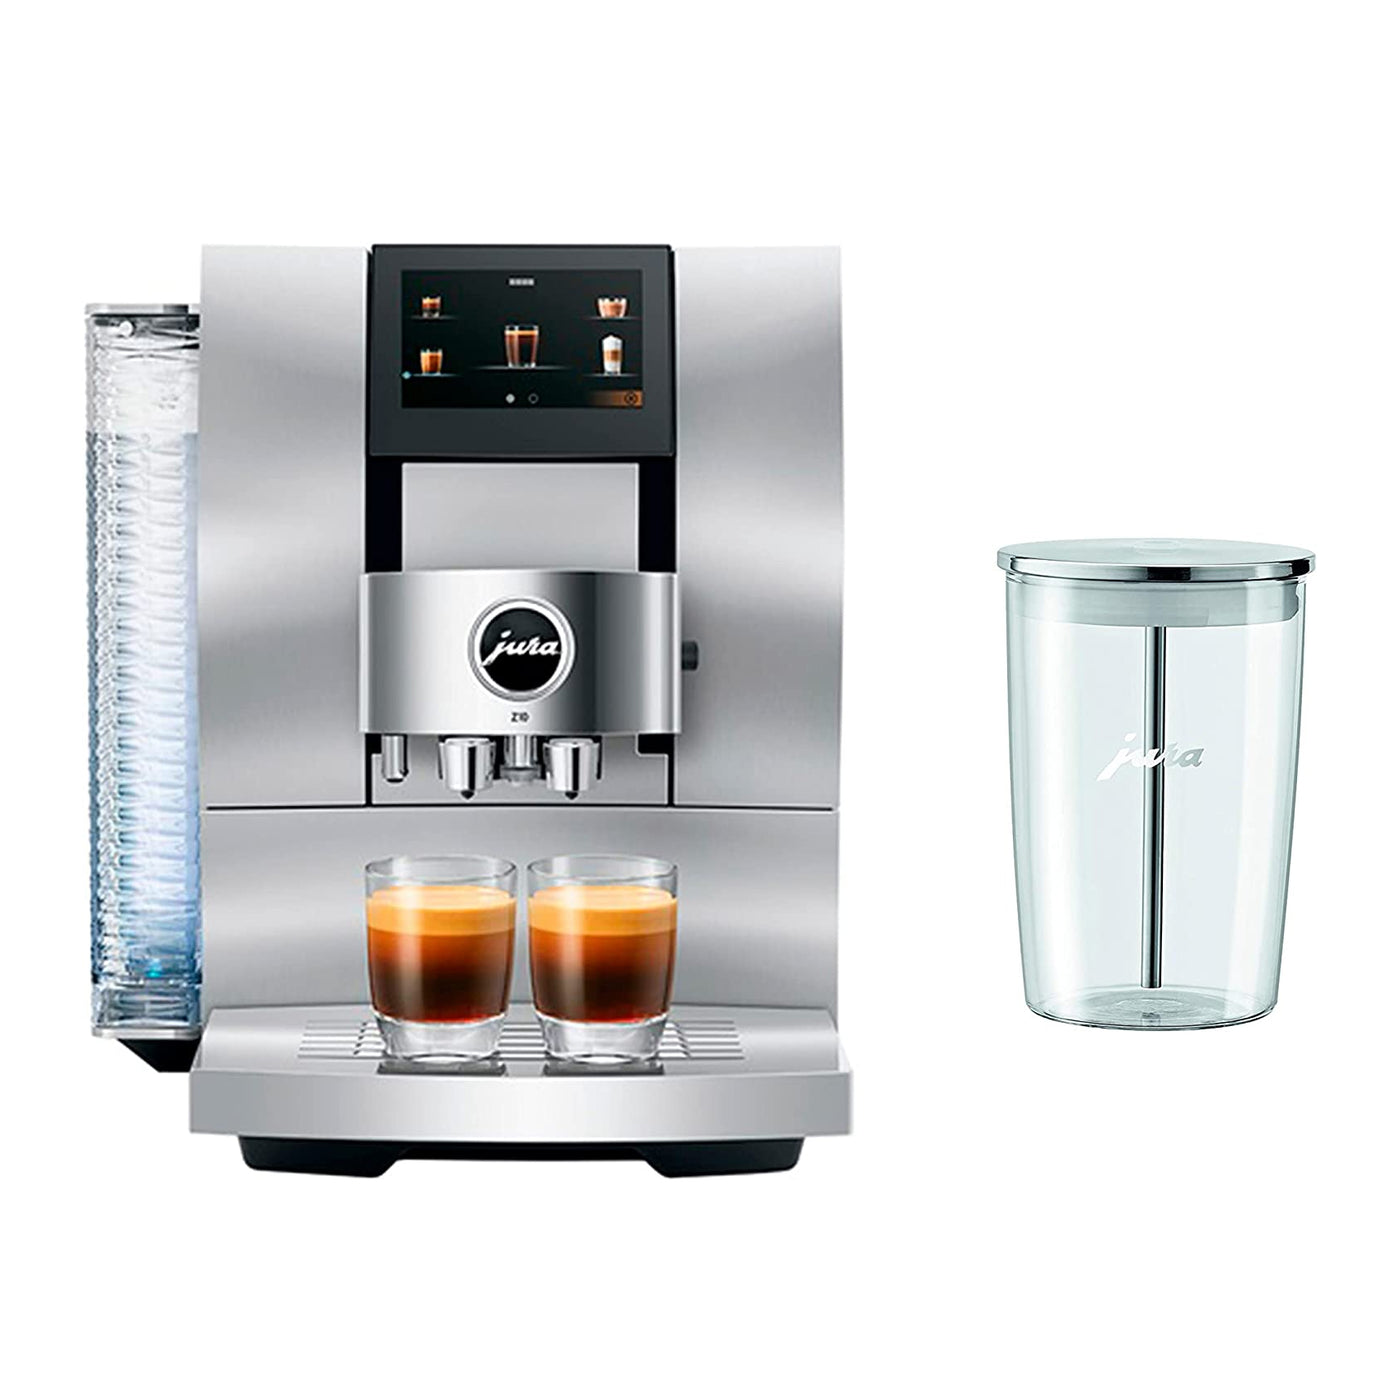 Wi-Fi Connect - JURA Coffee Machines - Specialities: Latte